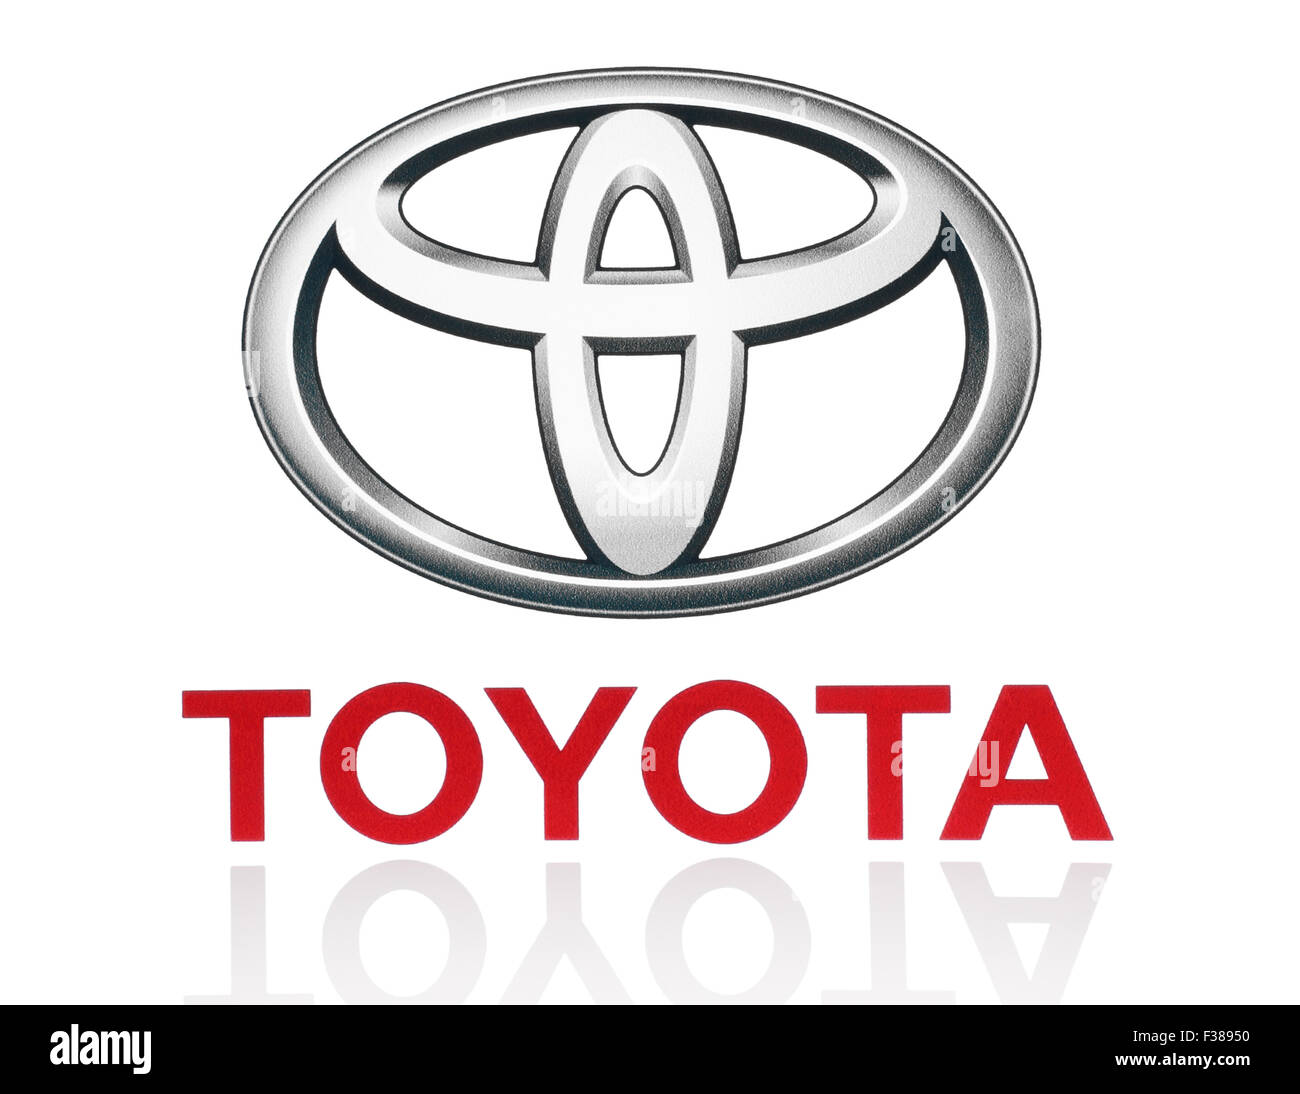 KIEV, UKRAINE - MARCH 21, 2015: Toyota logo printed on paper and placed on white background. Stock Photo